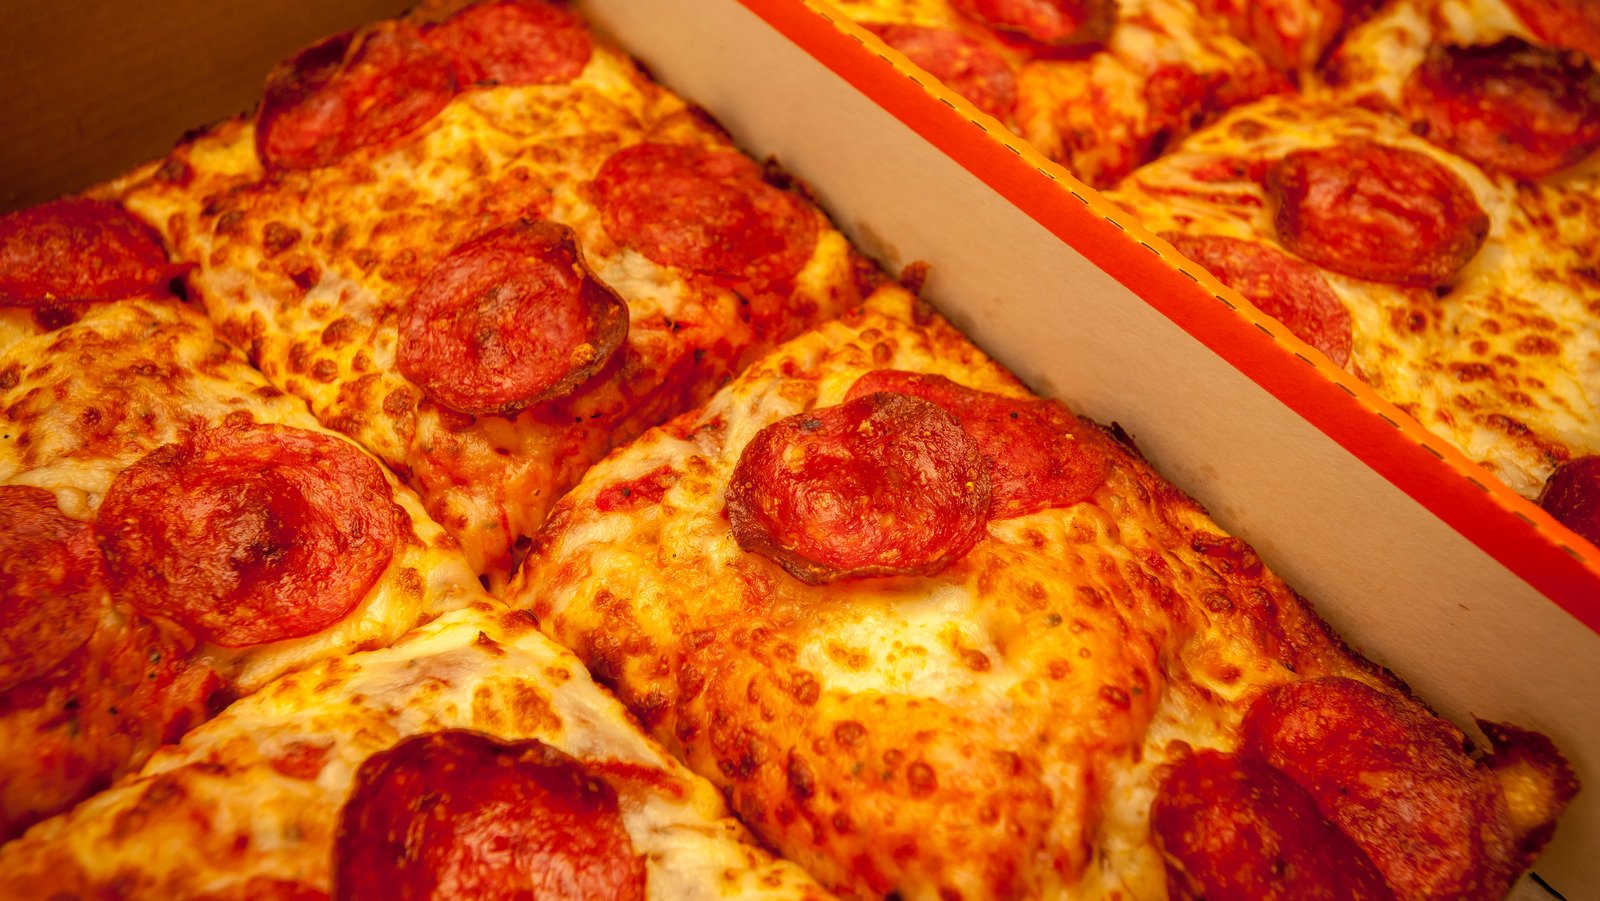 Little Caesars Vs. Pizza Hut: Which Is Better?